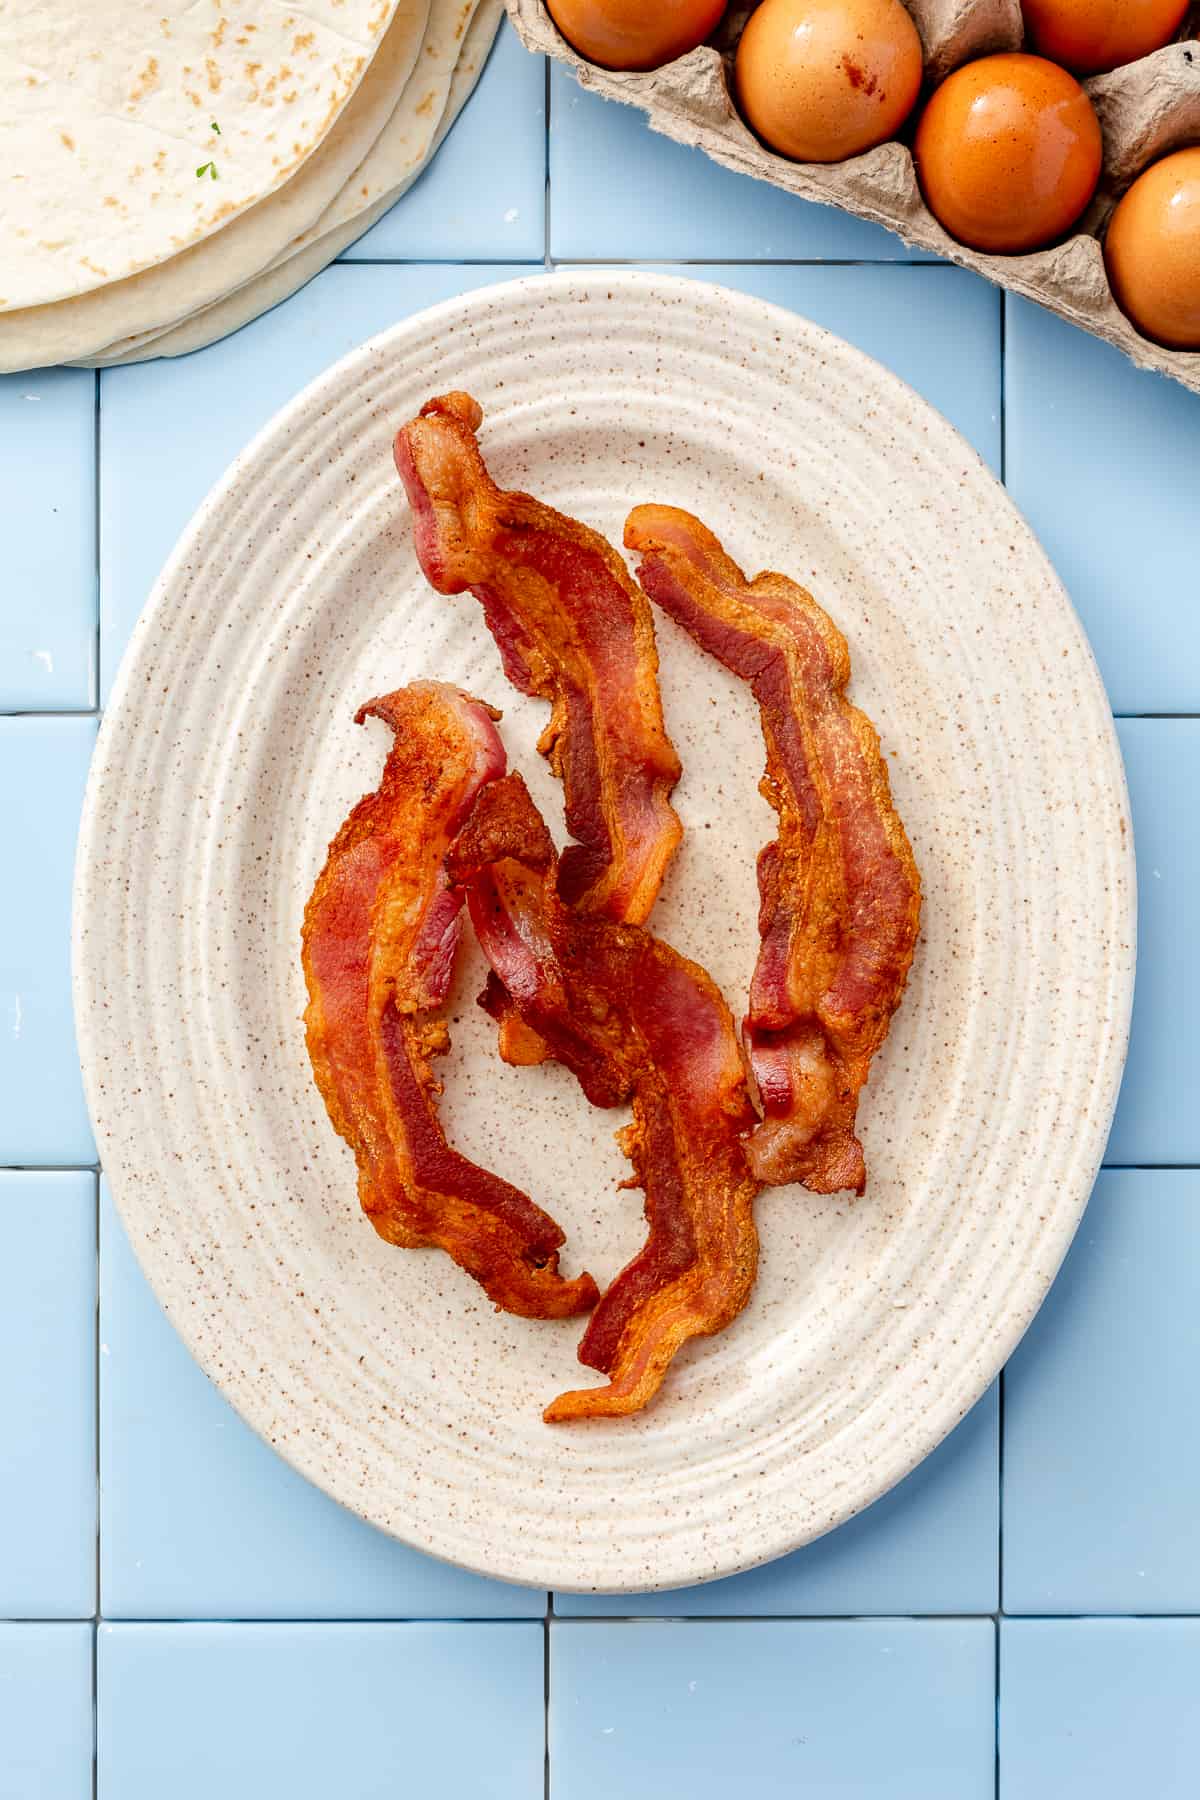 Oval cream plate filled with 4 pieces of crisped bacon on blue tile backdrop.